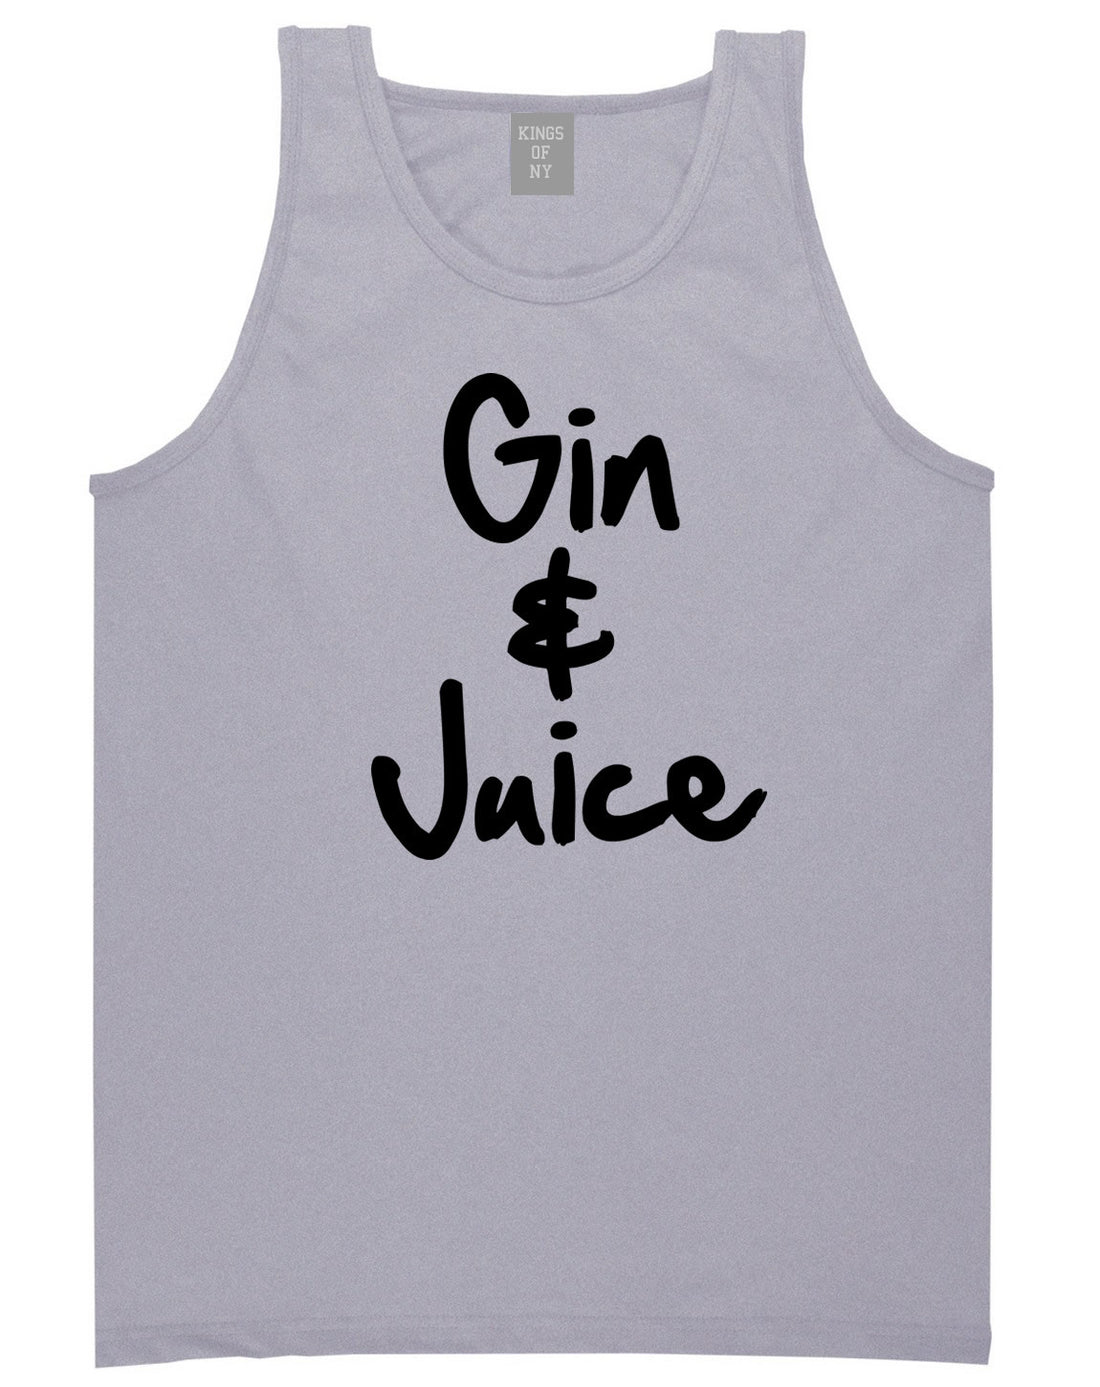 Kings Of NY Gin and Juice Tank Top in Grey